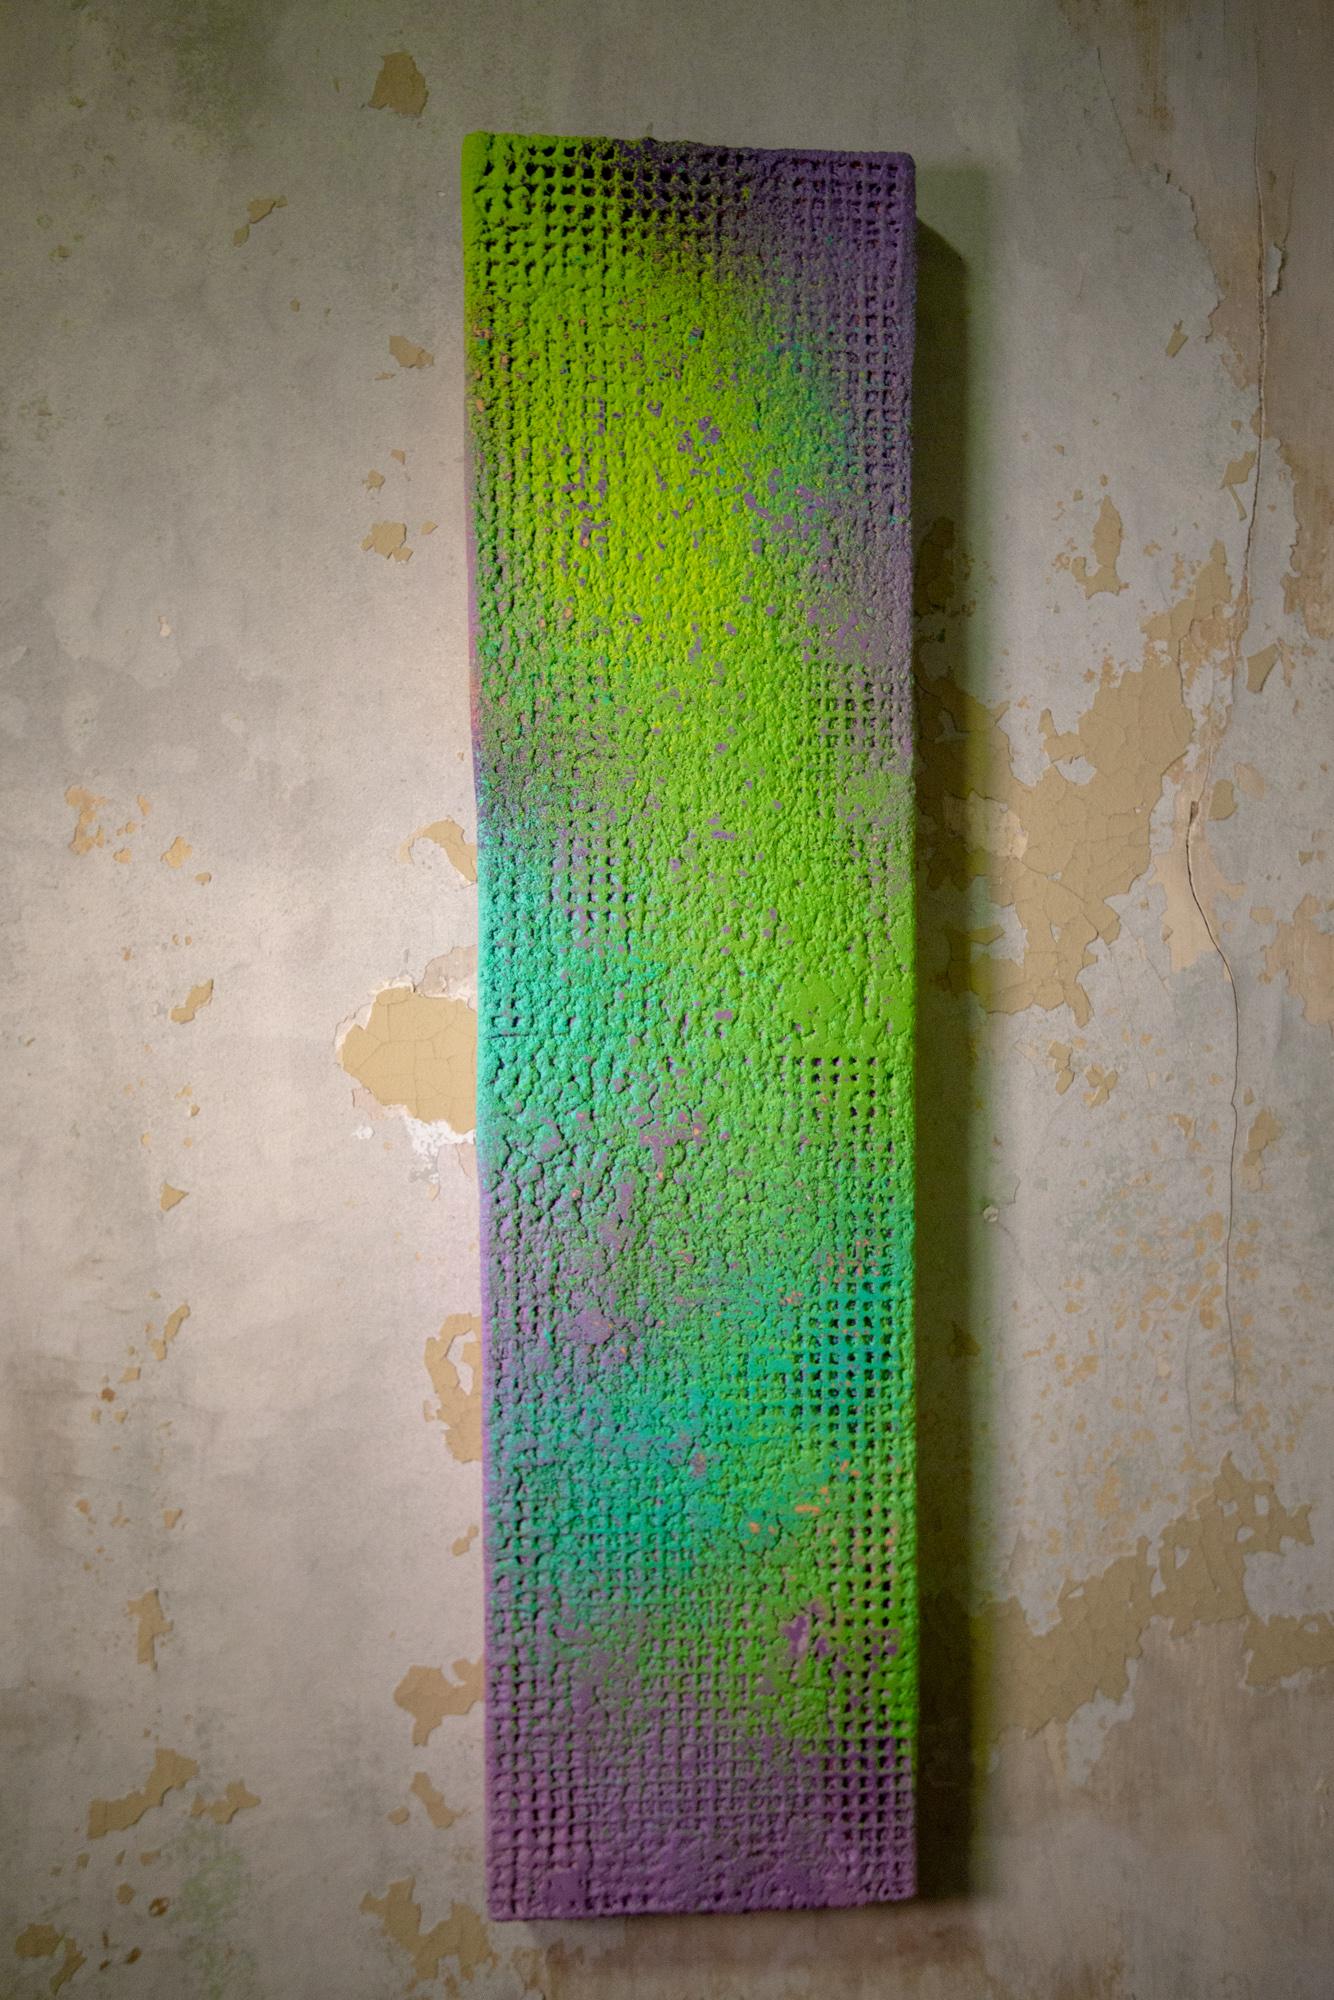 Flavor Building, bright green, purple textured rectangle painting by Joel Blenz